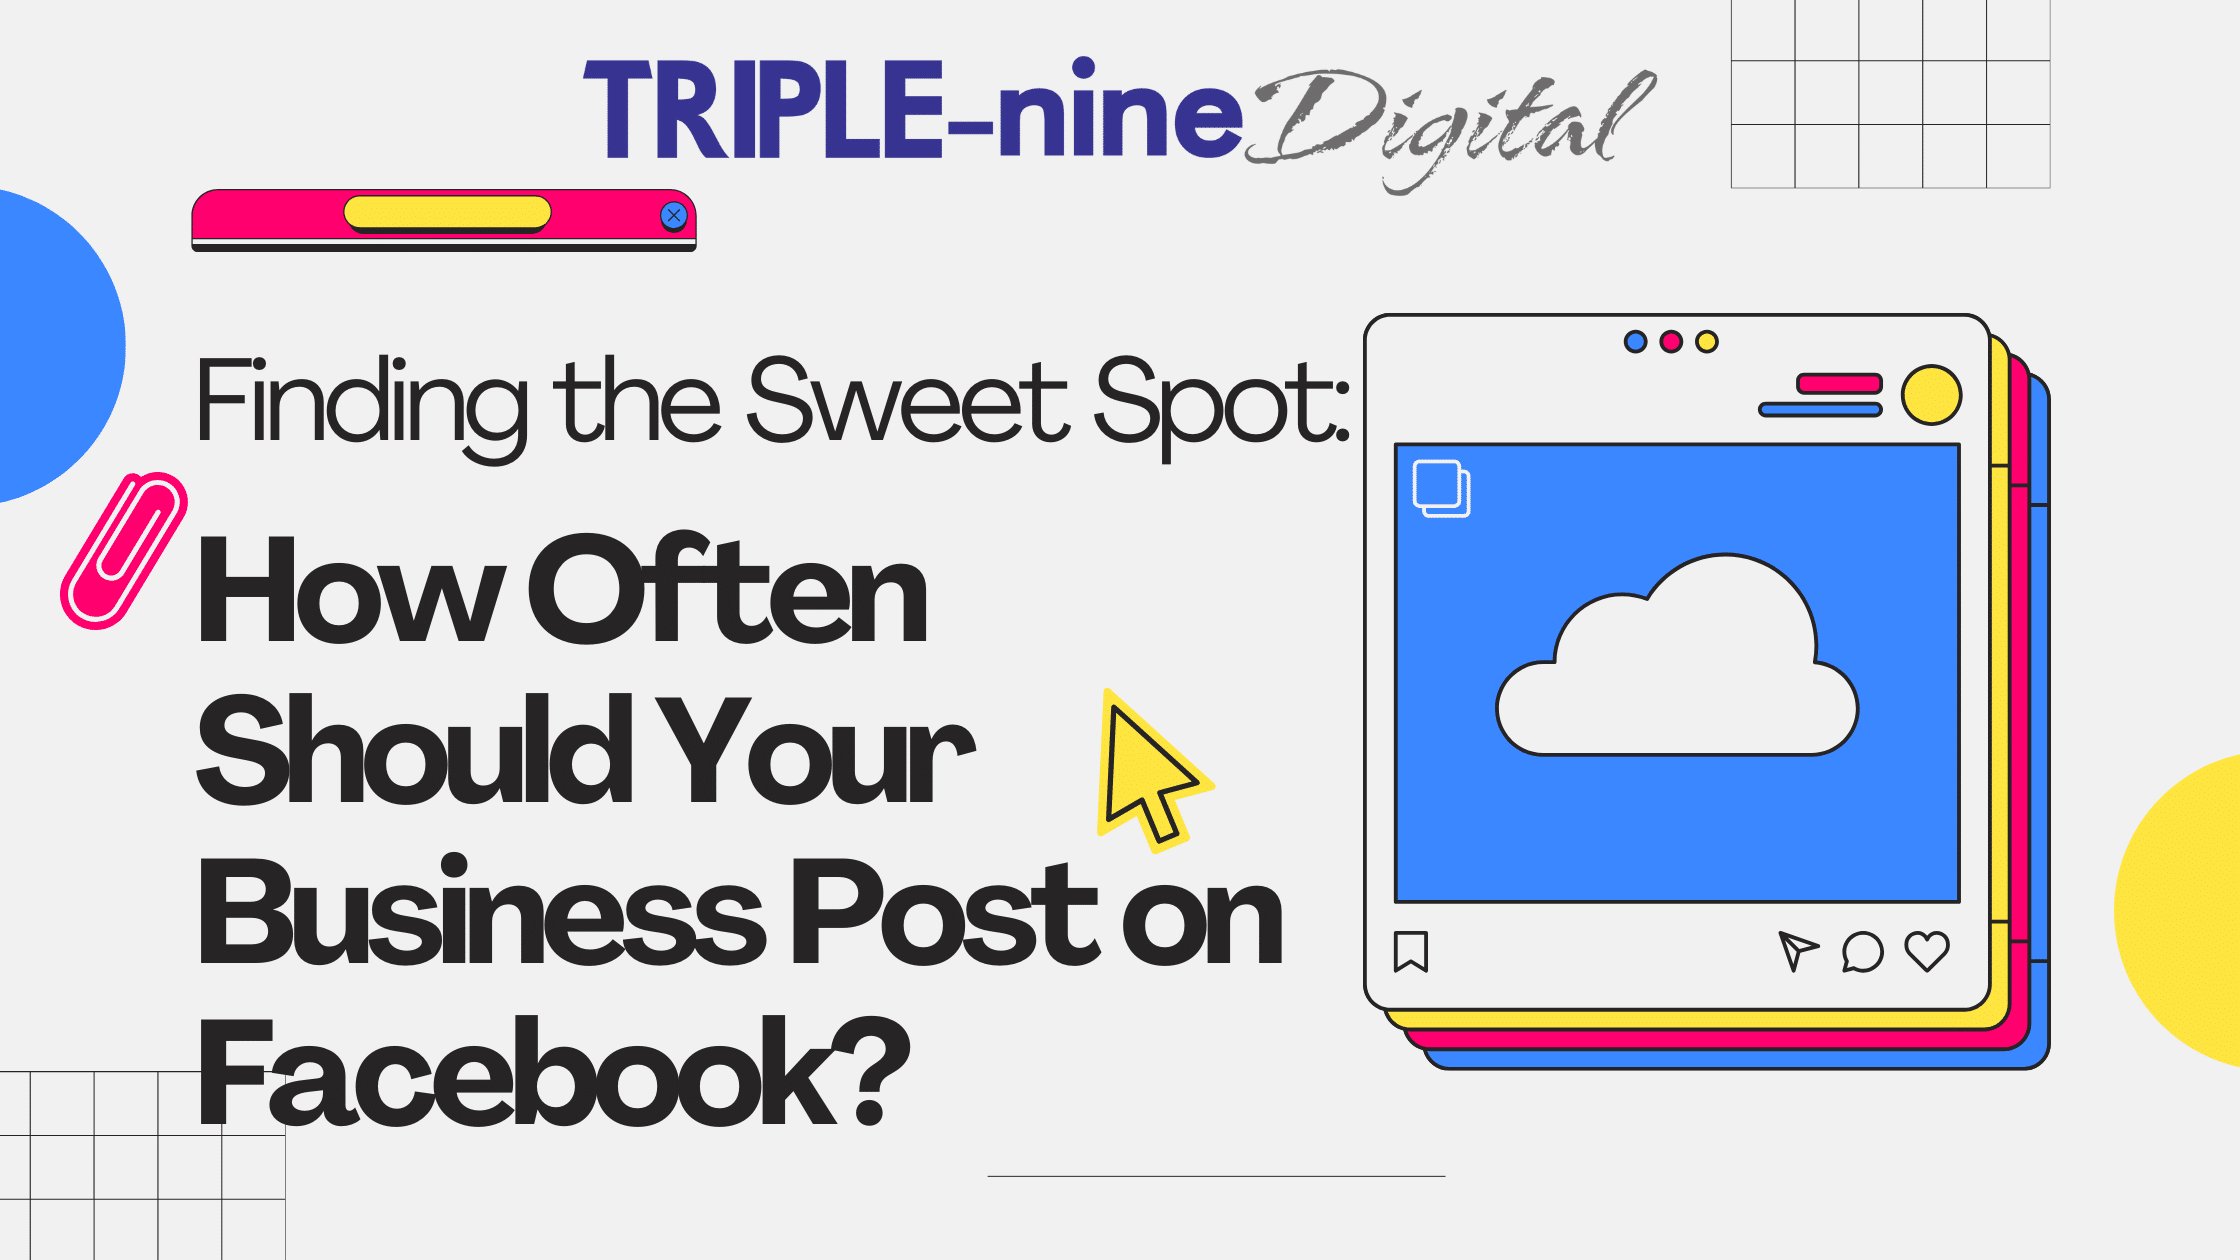 Finding the Sweet Spot: How Often Should Your Business Post on Facebook?